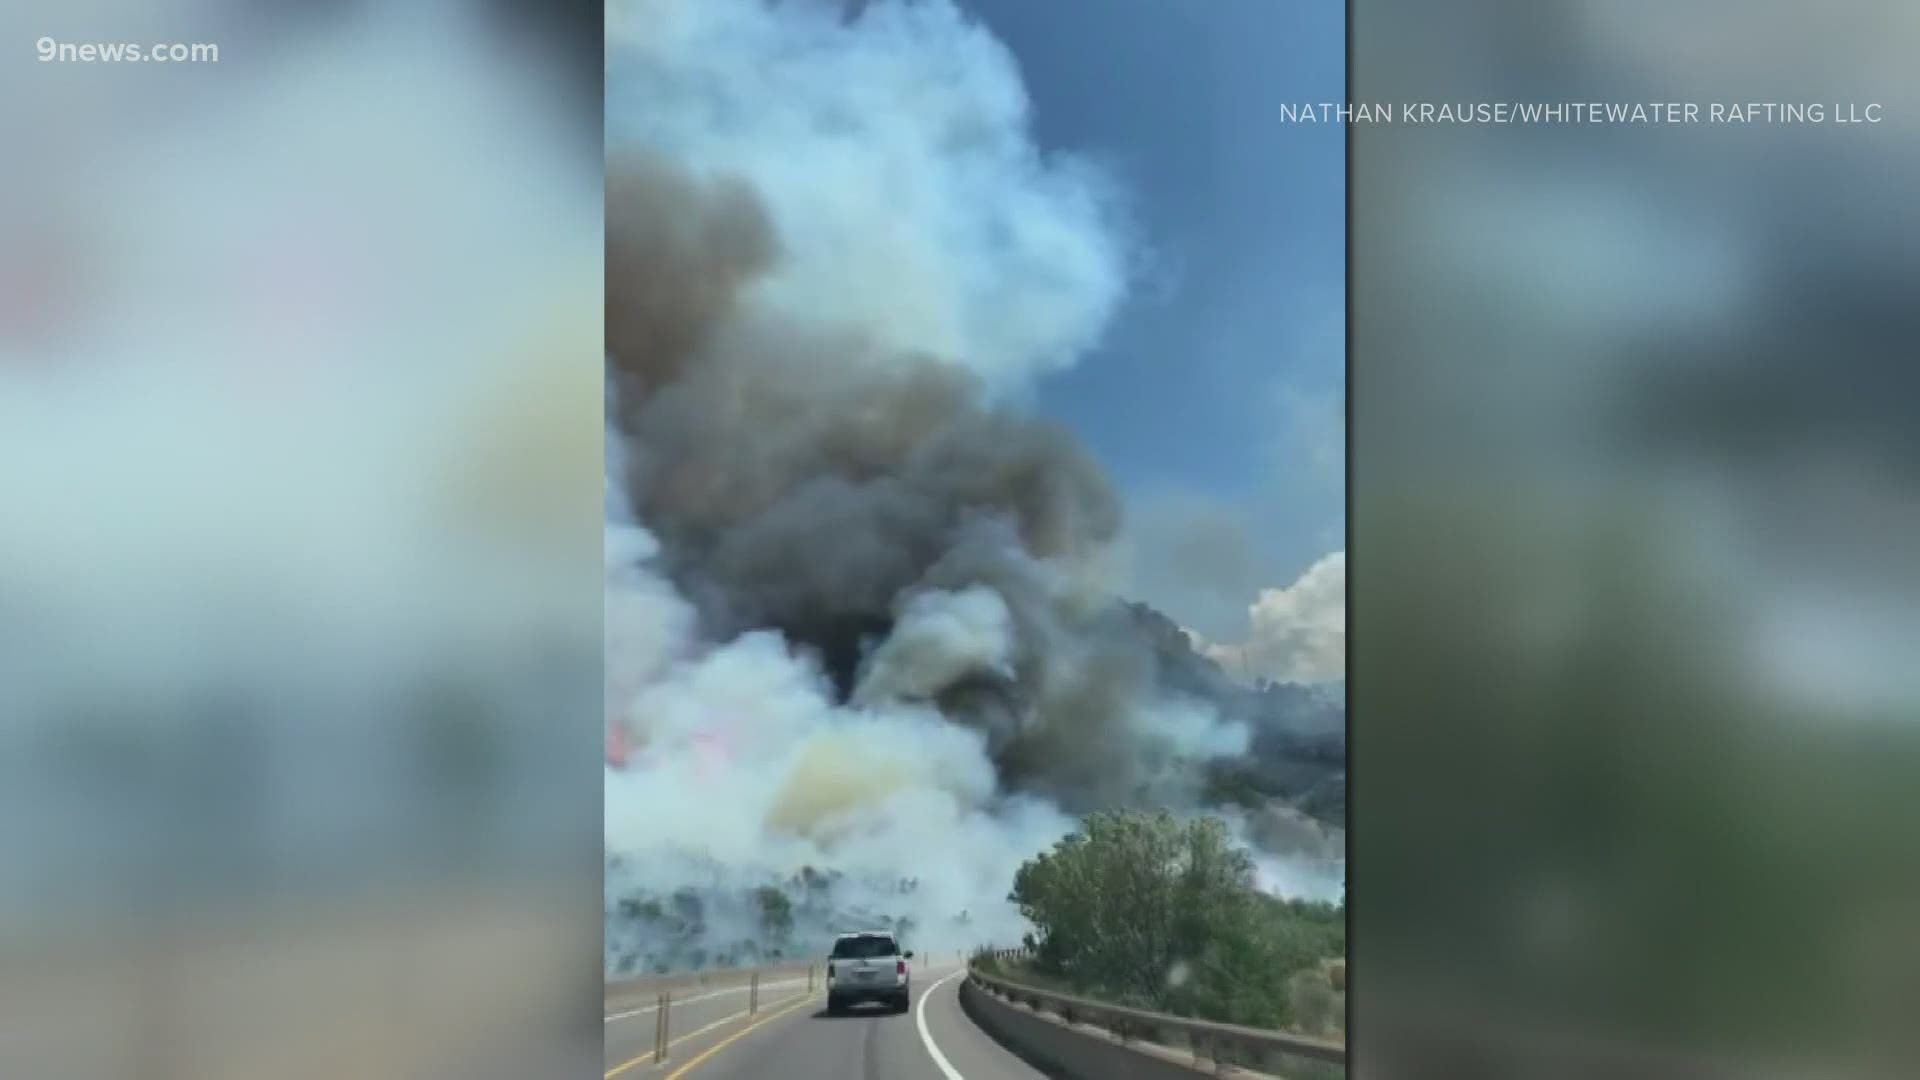 Interstate 70 remains closed in both directions through Glenwood Canyon Tuesday morning due to a wildfire burning in the area.